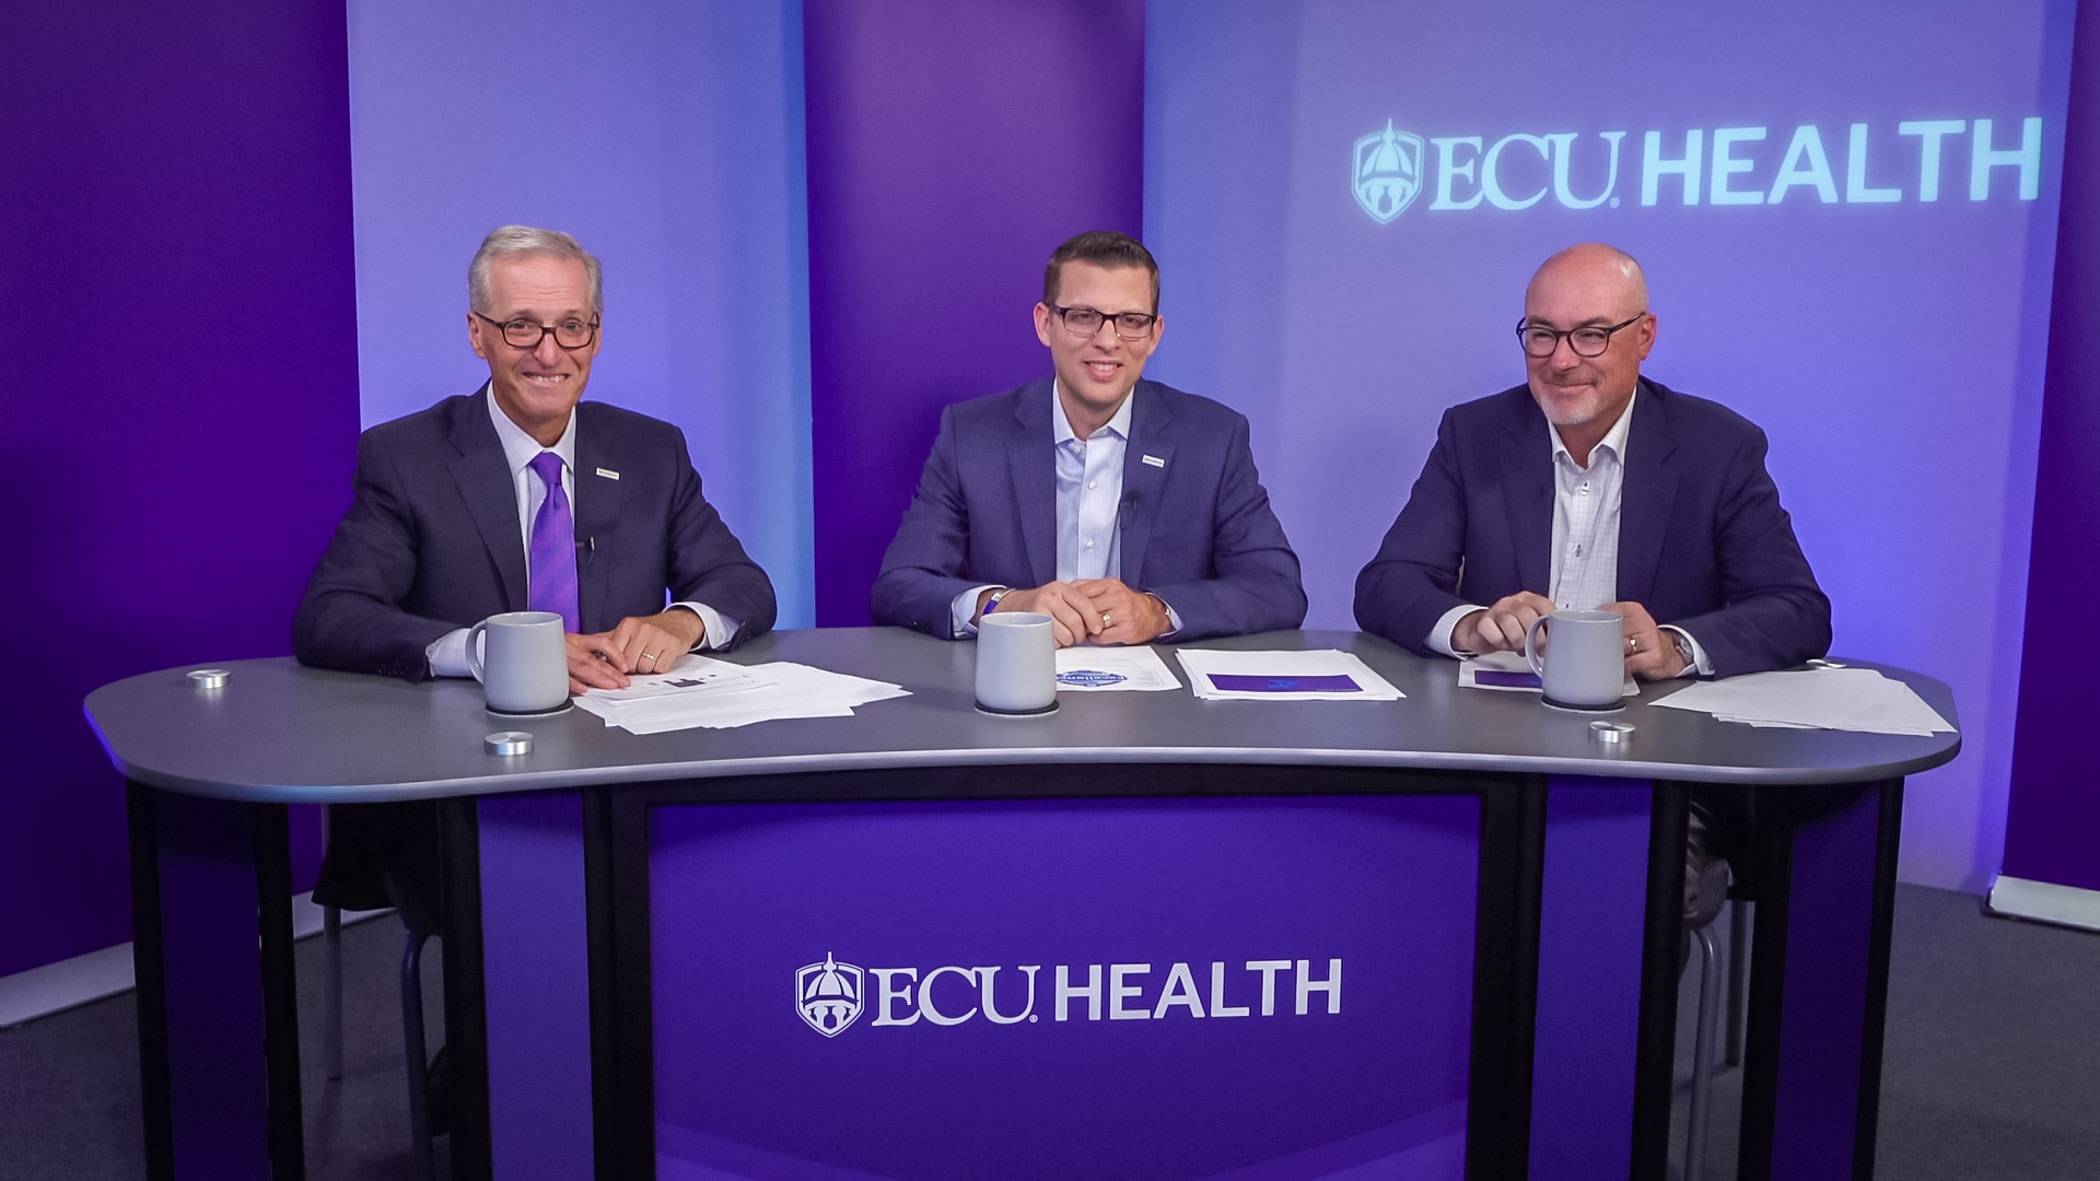 ECU Health Chief Financial Officer Andy Zukowski sits between CEO Dr. Michael Waldrum, left, and COO Brian Floyd, right, during a Looking Forward with Leadership session with ECU Health team members. The three sit behind a branded ECU Health desk.